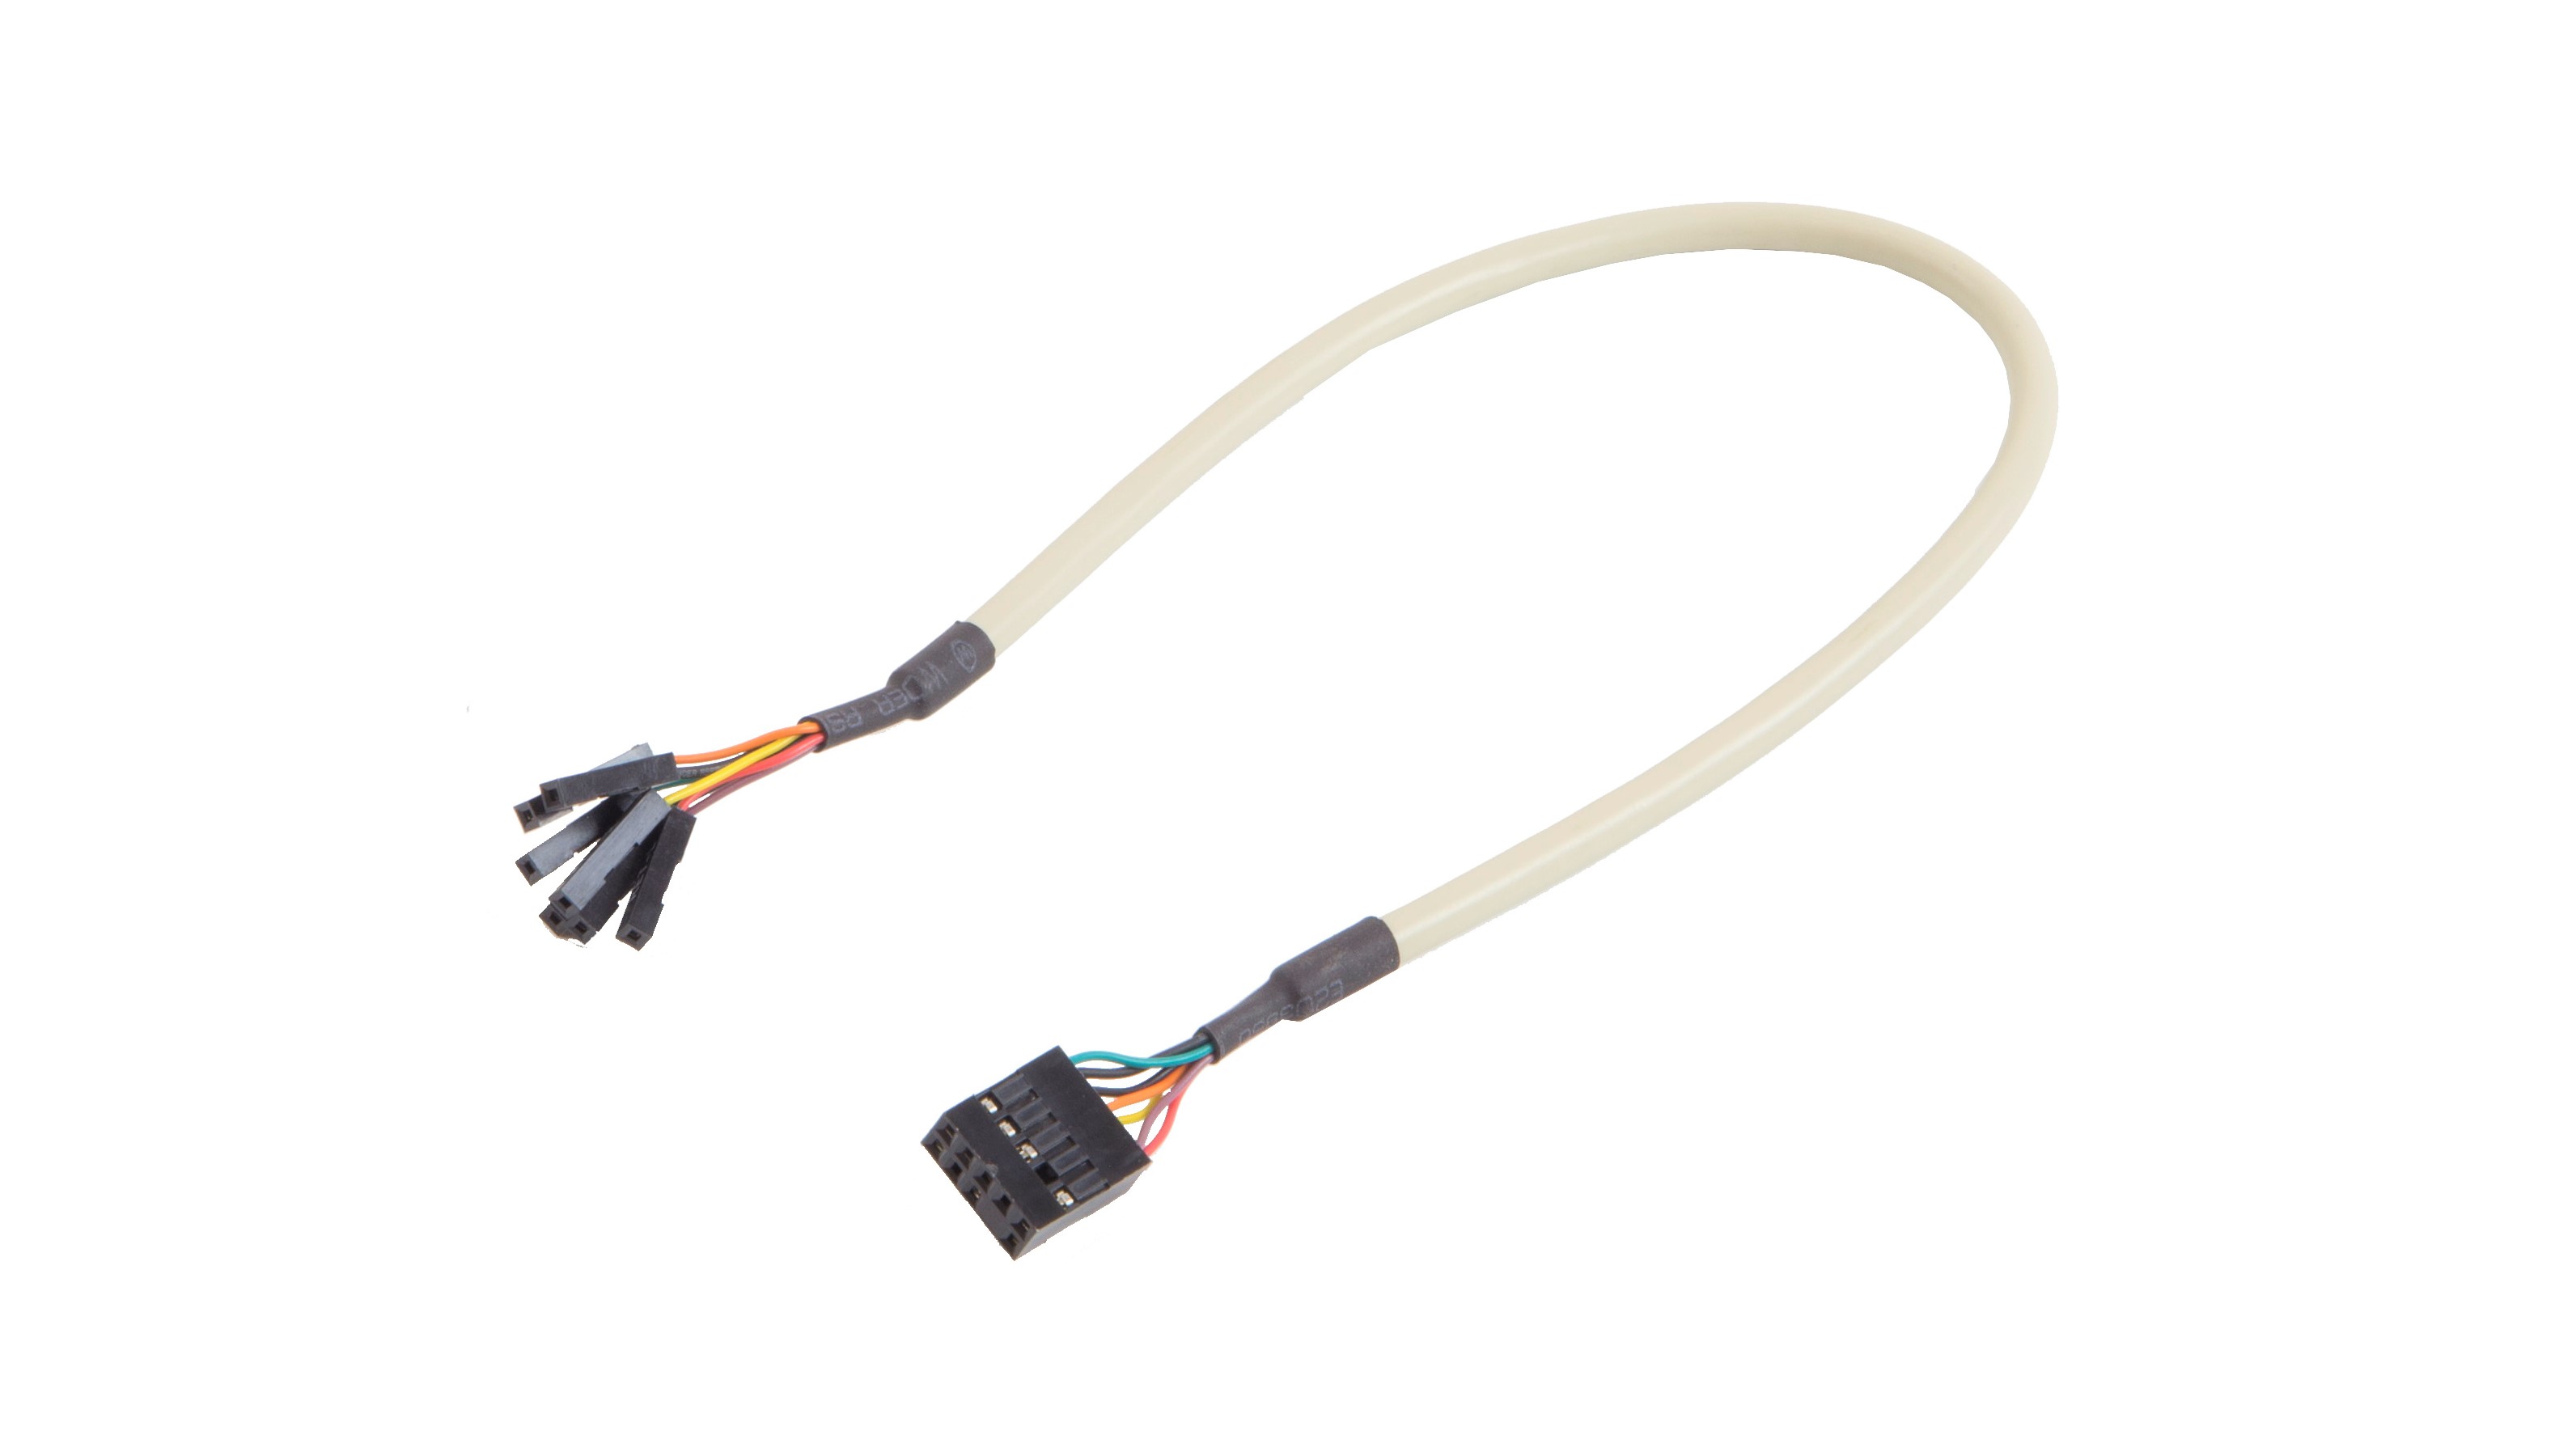 AUDIO CABLE(PITCH 2.54 HOUSING)  |Products|Accessories|Cable & Cord